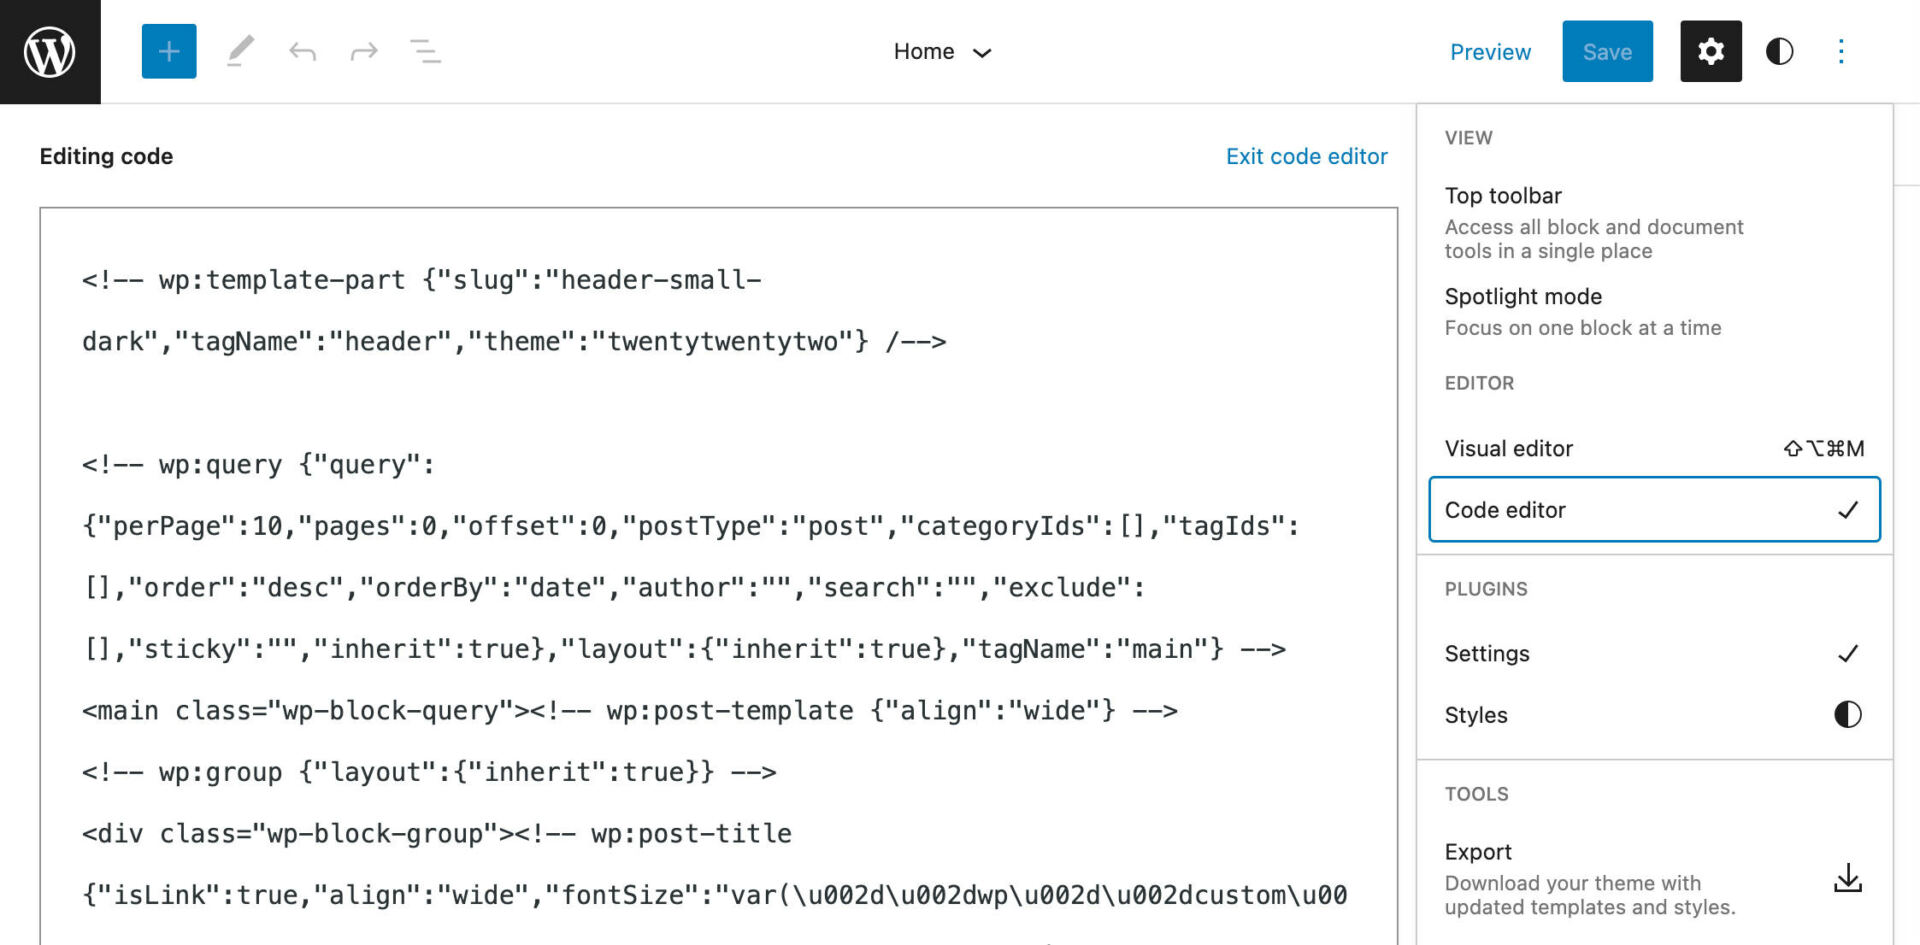 WordPress 6.0 adds the Code Editor to the Site Editor.